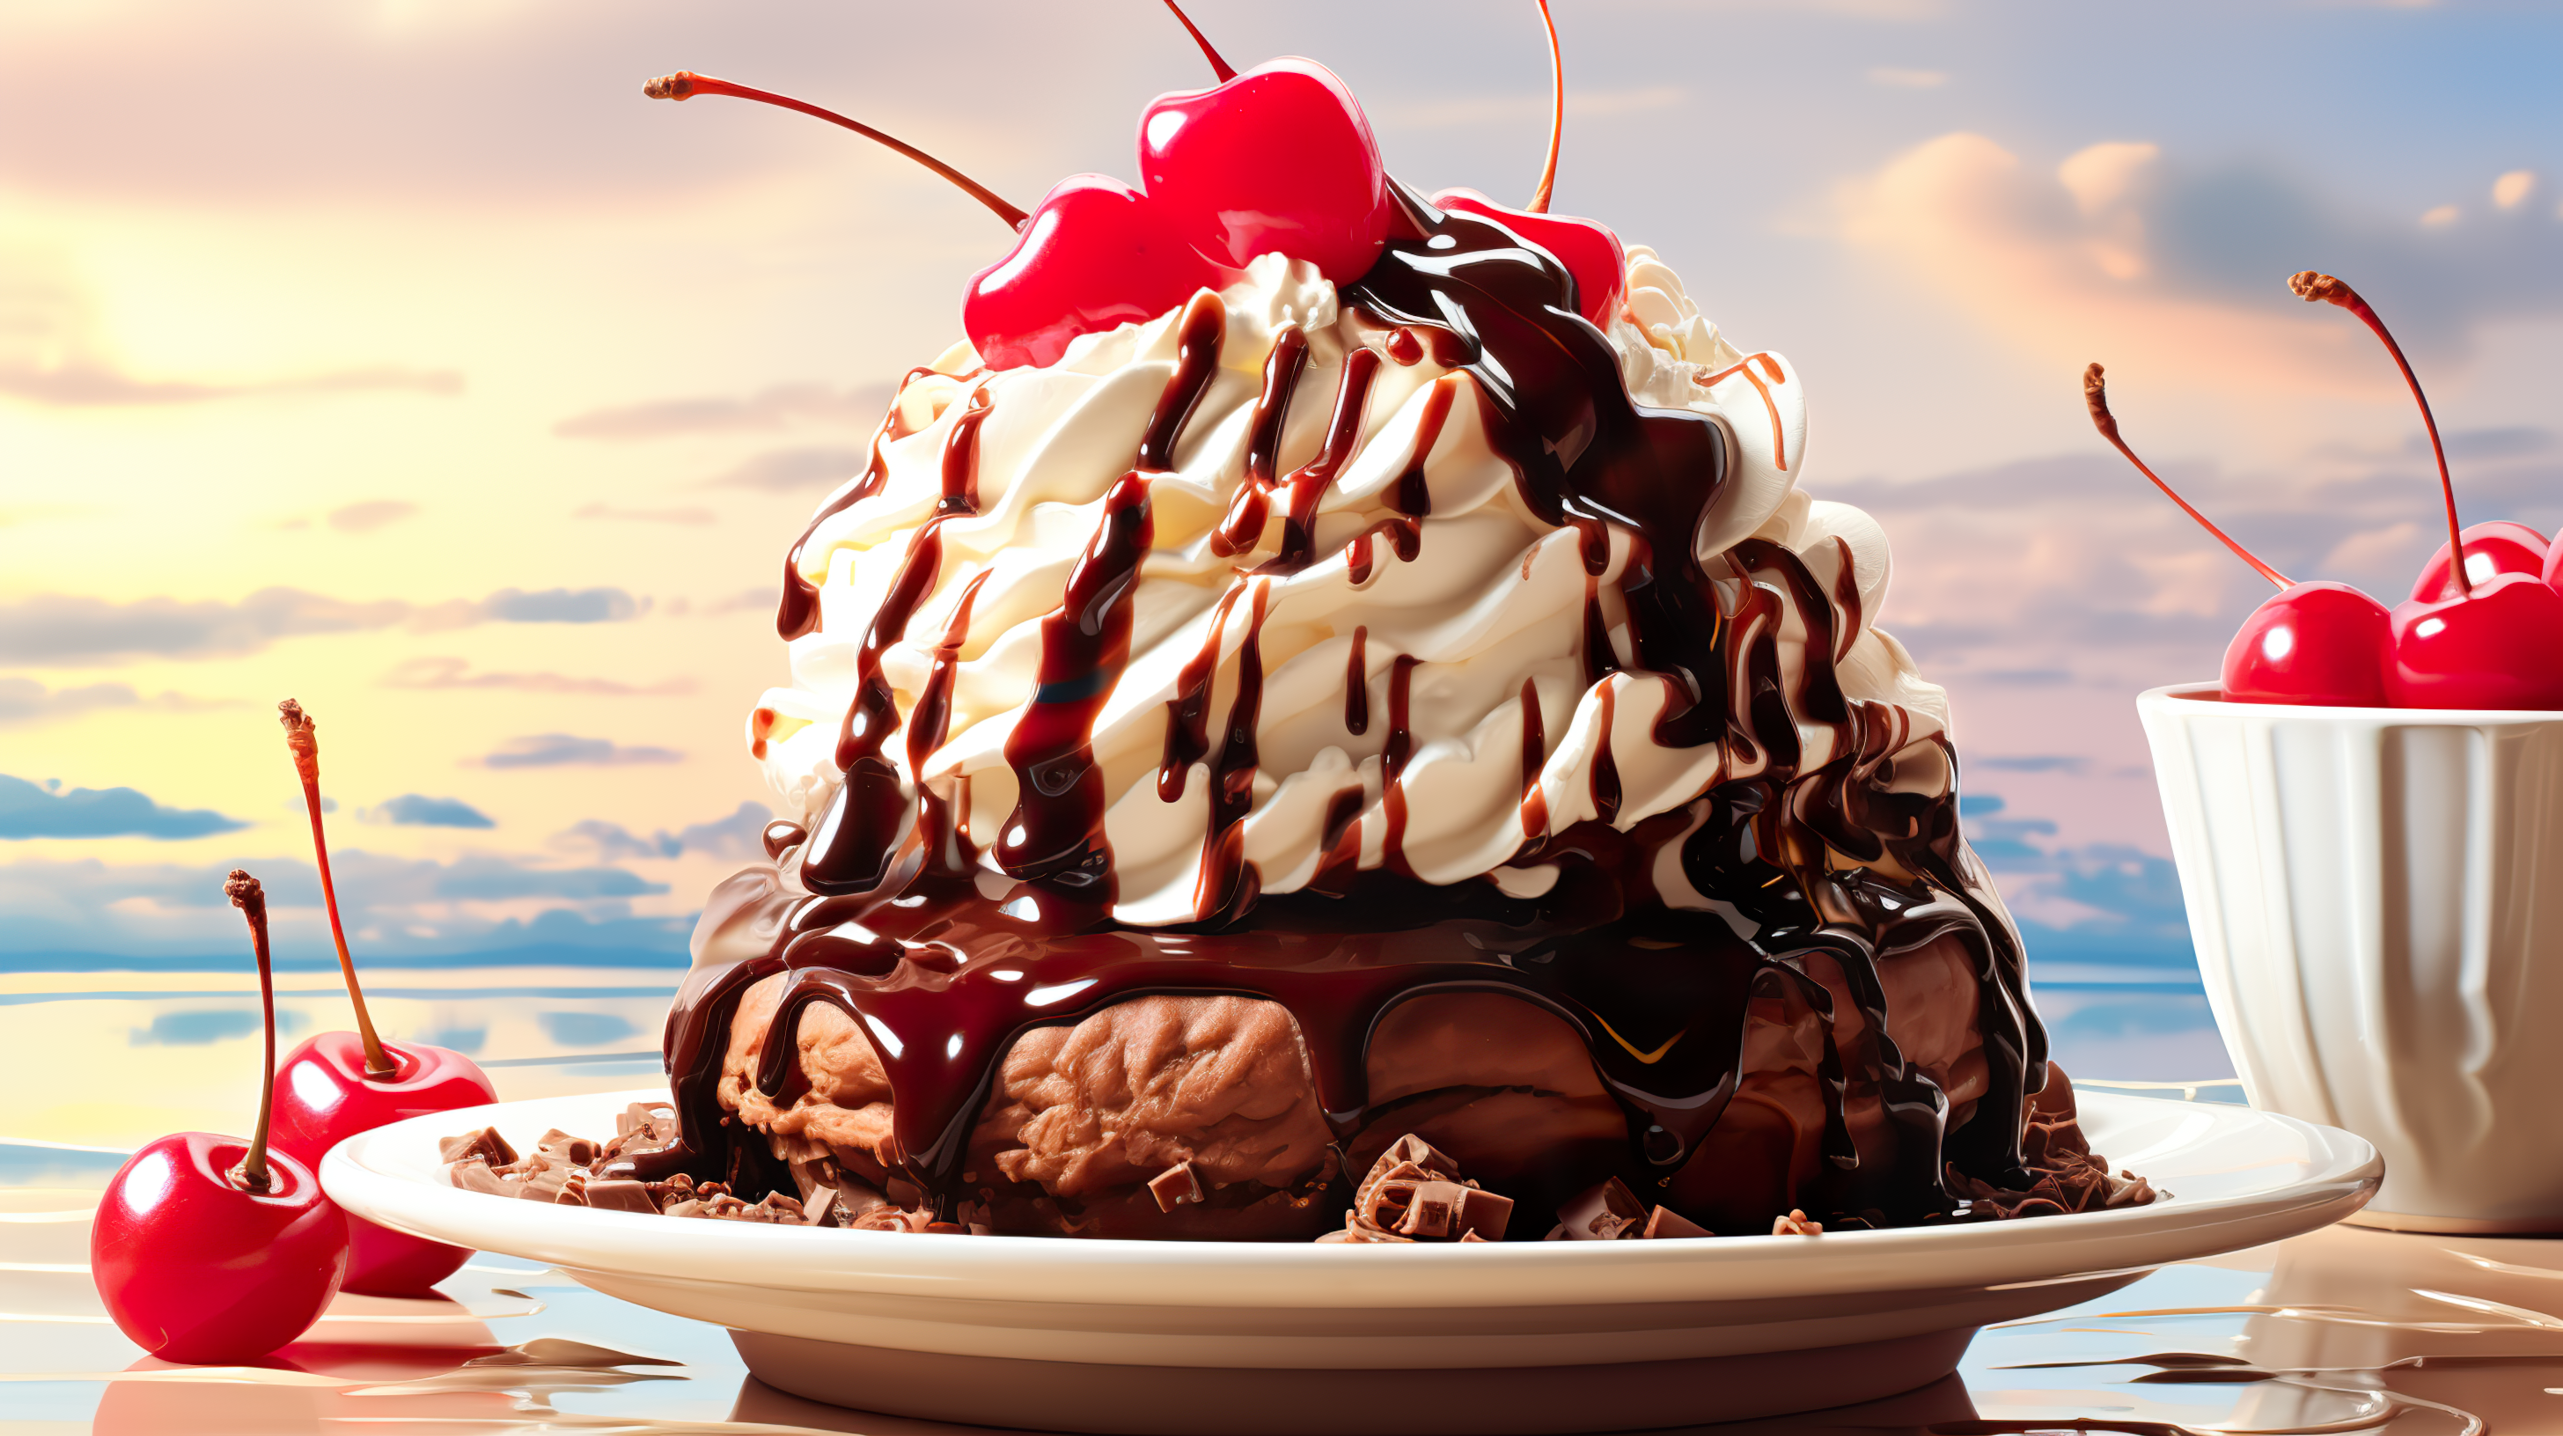 Decadent chocolate sundae with whipped cream, cherries, and drizzled sauce against a sunset sky, perfect as a HD desktop wallpaper or background.